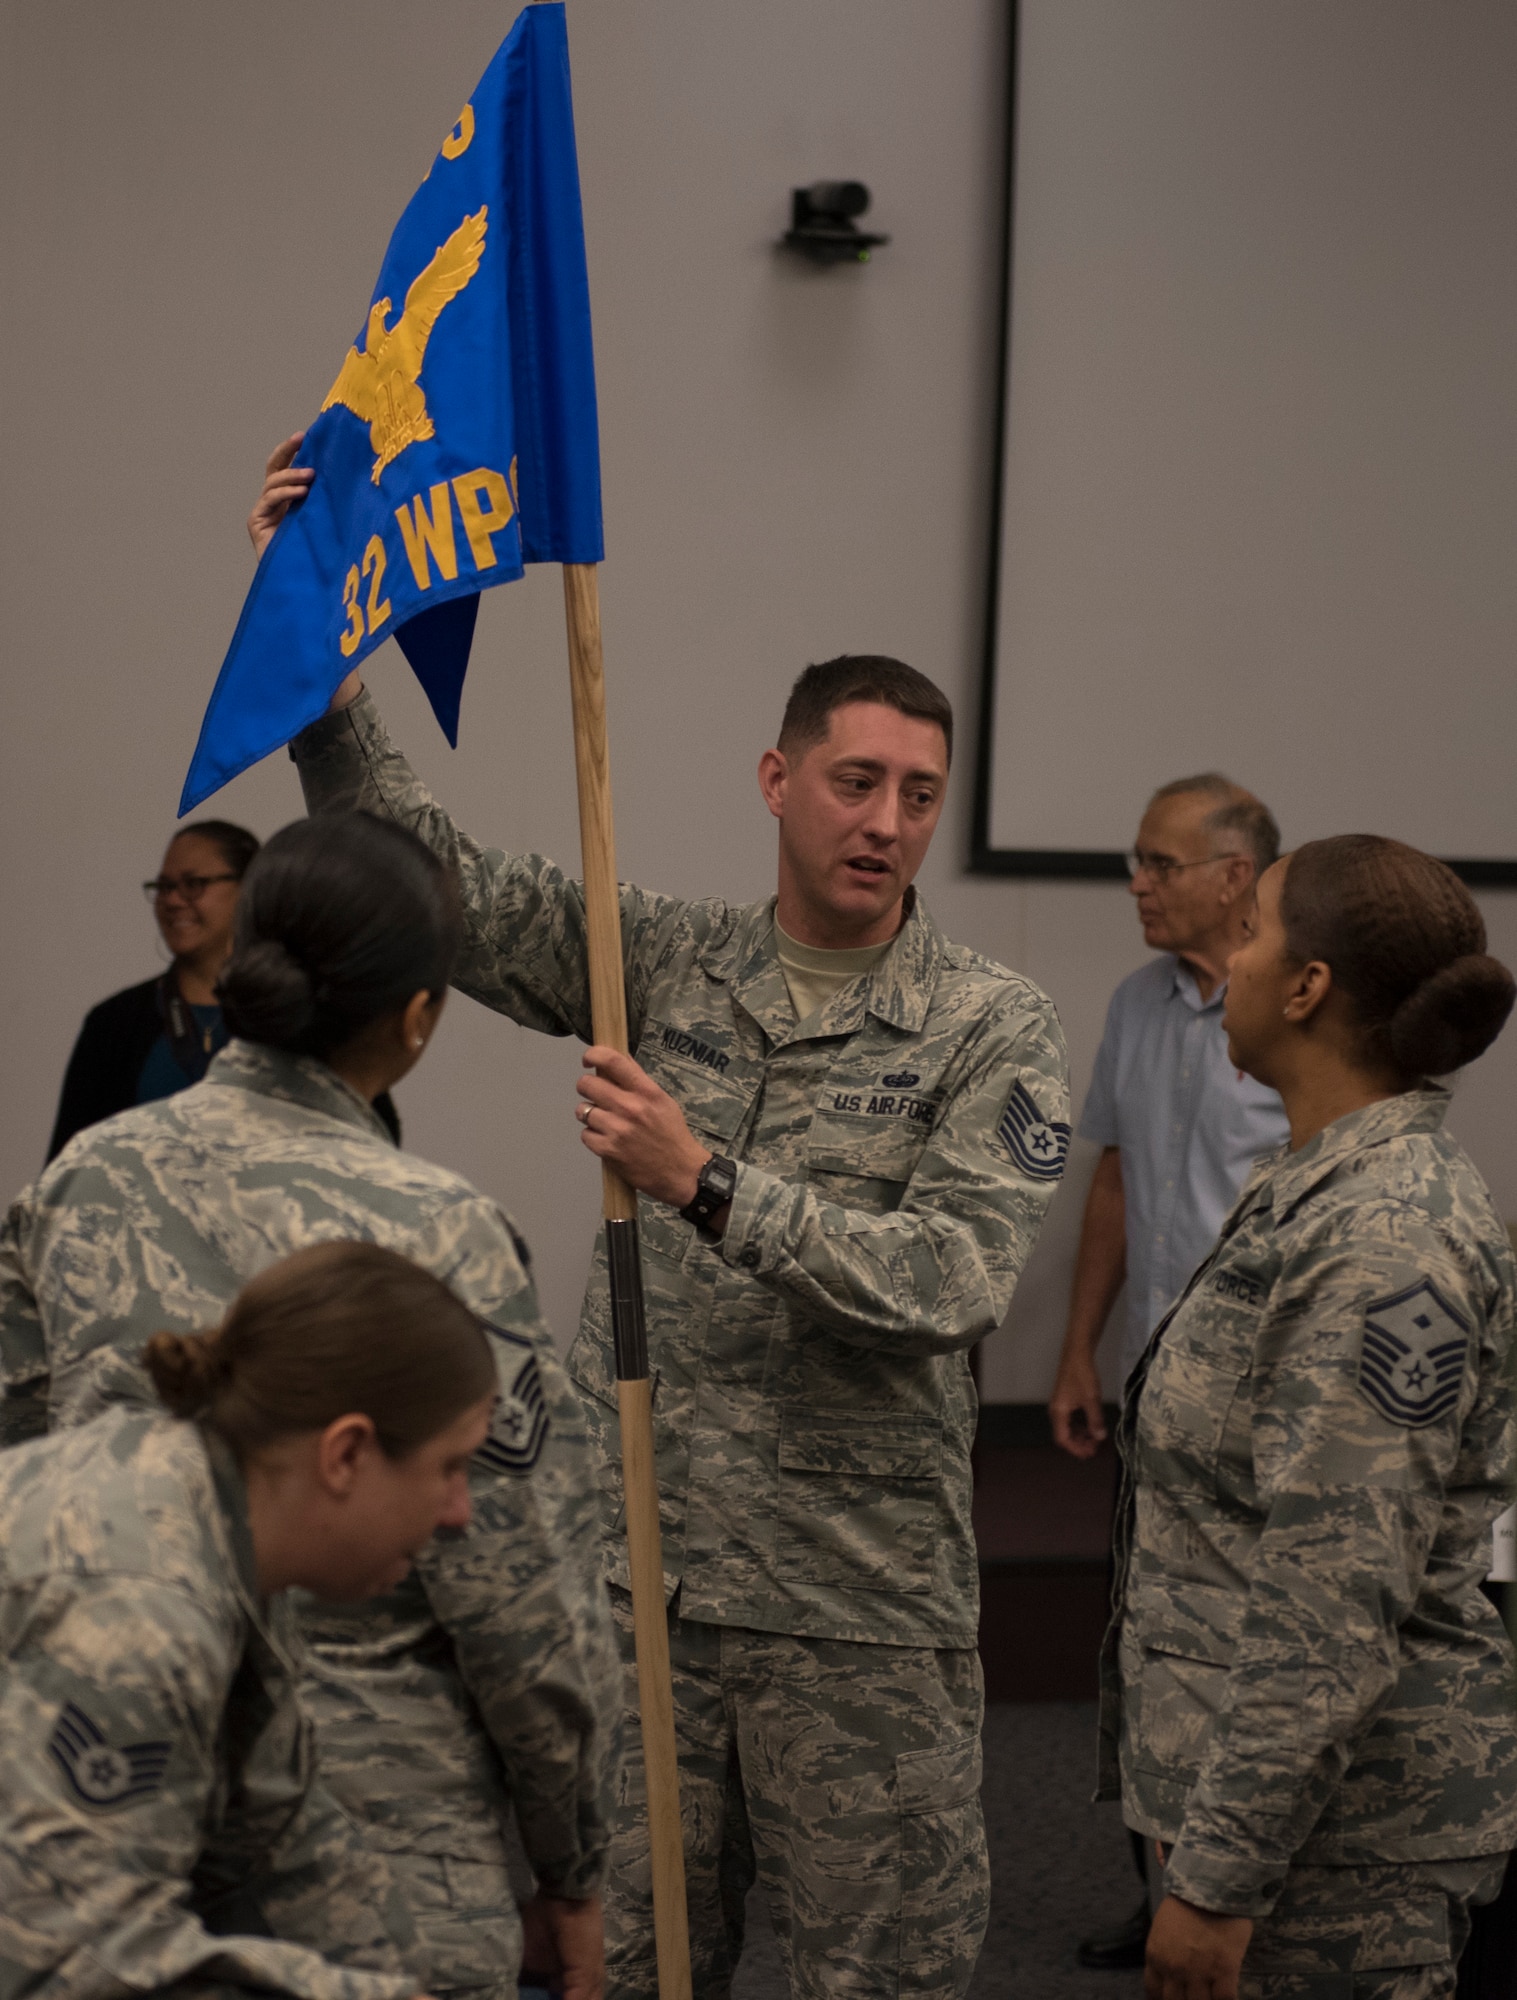 Tech. Sgt. Kieth Kuzniar, 32nd Weapons Squadron superintendent, shows off the new squadron guidon to Master Sgt. Brandi Love, U.S. Air Force Weapons School first sergeant, during an assumption of command ceremony at Nellis Air Force Base, Nevada, June 28, 2018. The 32nd WPS will focus on teaching Cyber Warfare Operations. (U.S. Air Force photo by Airman 1st Class Andrew D. Sarver)